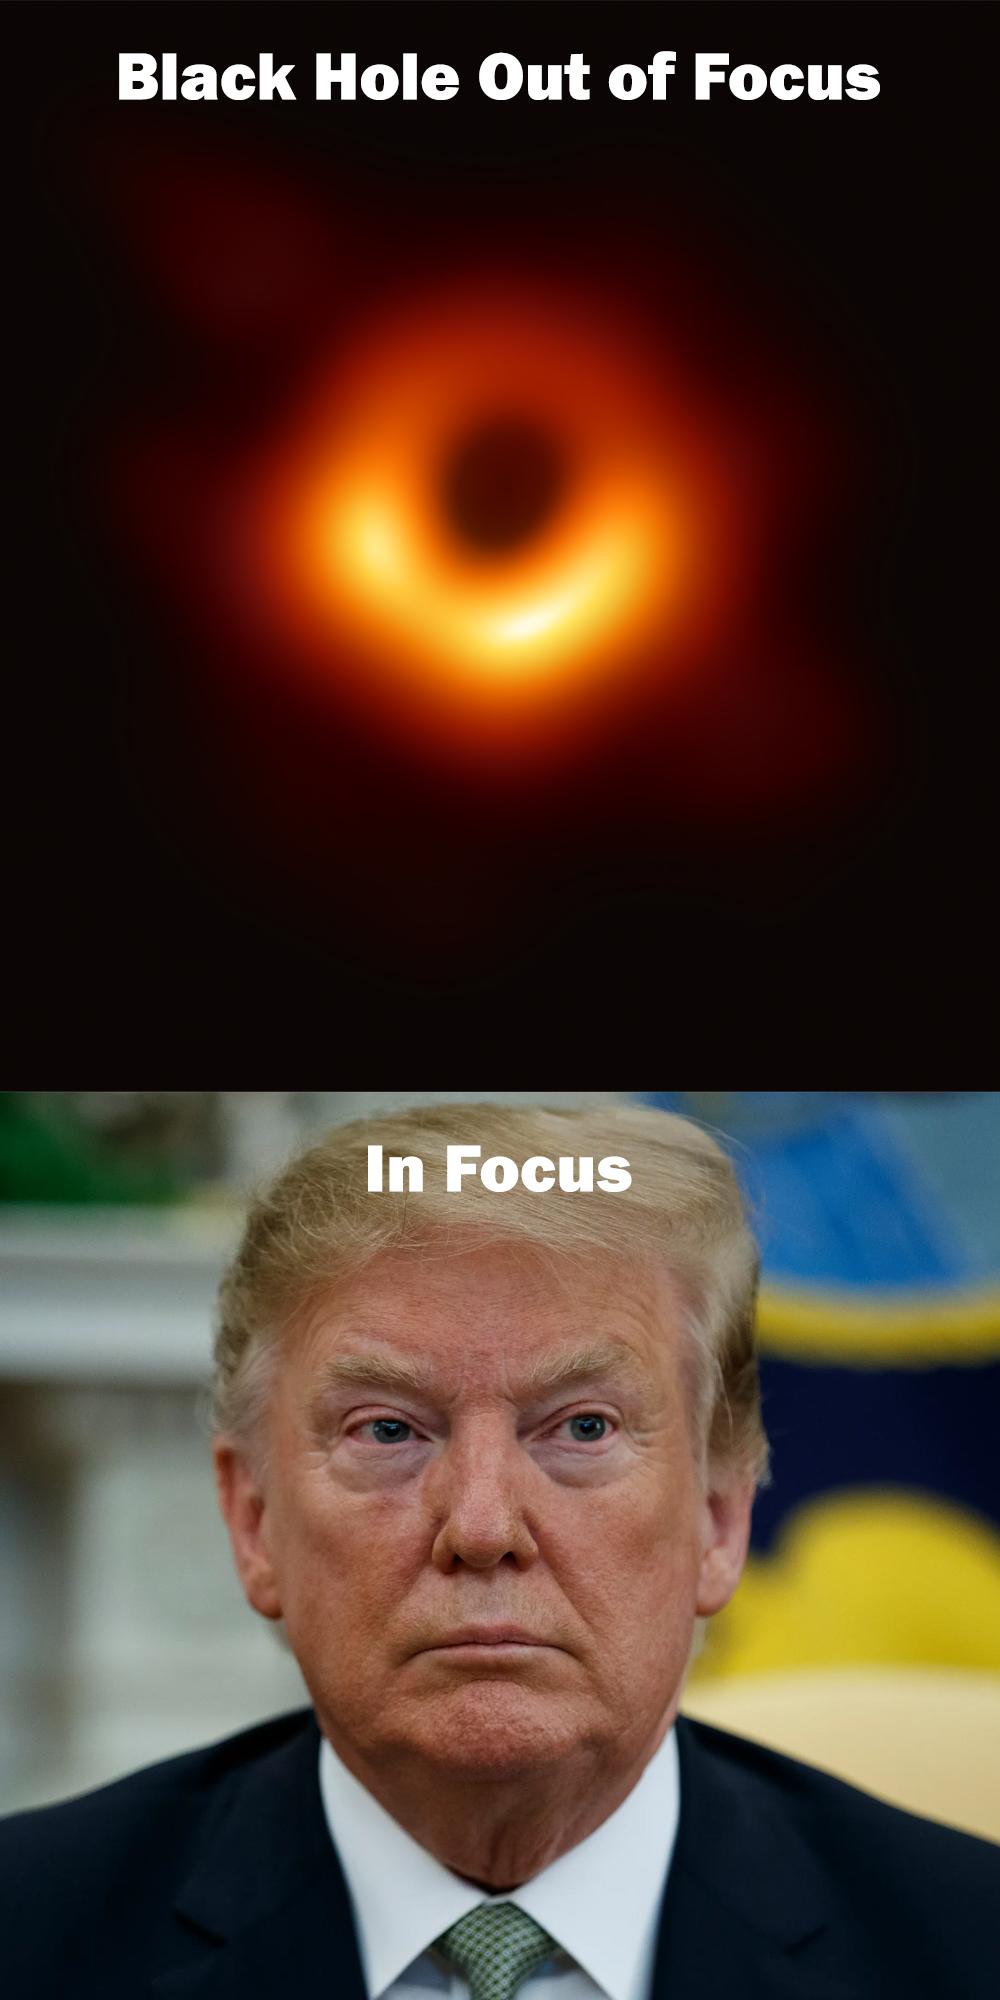 Black hole meme with the original photo and caption, out of focus, and then a picture of Donald Trump with the caption, in focus.